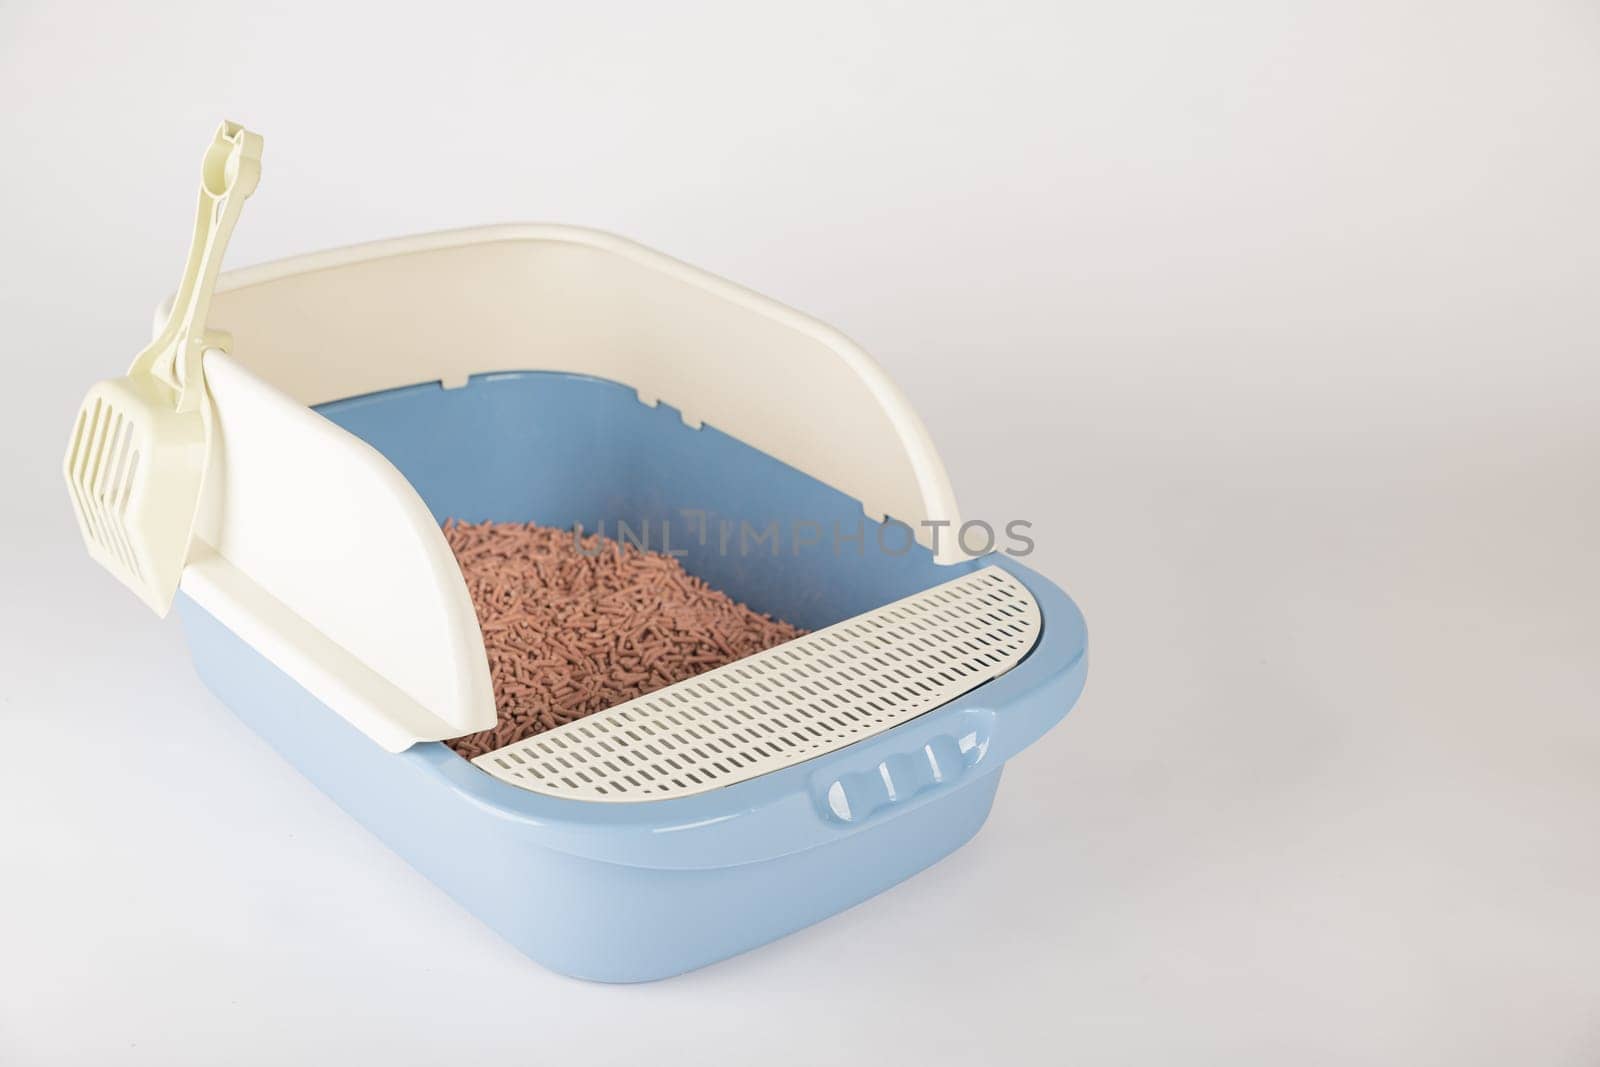 Promote cleanliness and hygiene with an isolated plastic cat litter toilet tray and scoop on a white background. A must-have for your pet's well-being.